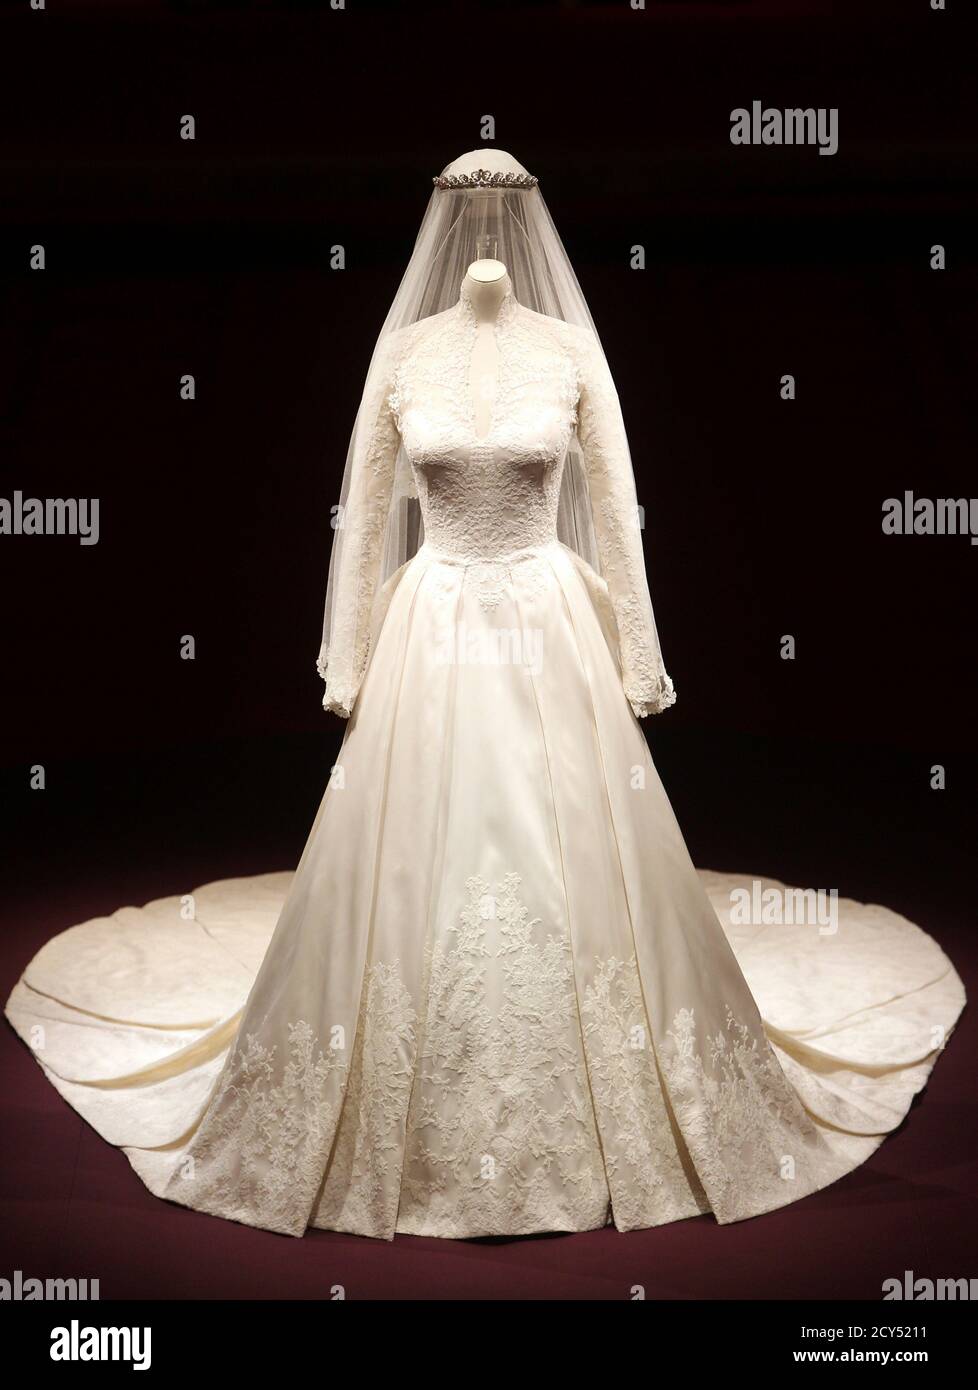 The wedding dress of Britain's Catherine, Duchess of Cambridge is seen as  it is prepared for display at Buckingham Palace in London July 20, 2011.  Buckingham Palace expects record crowds this summer